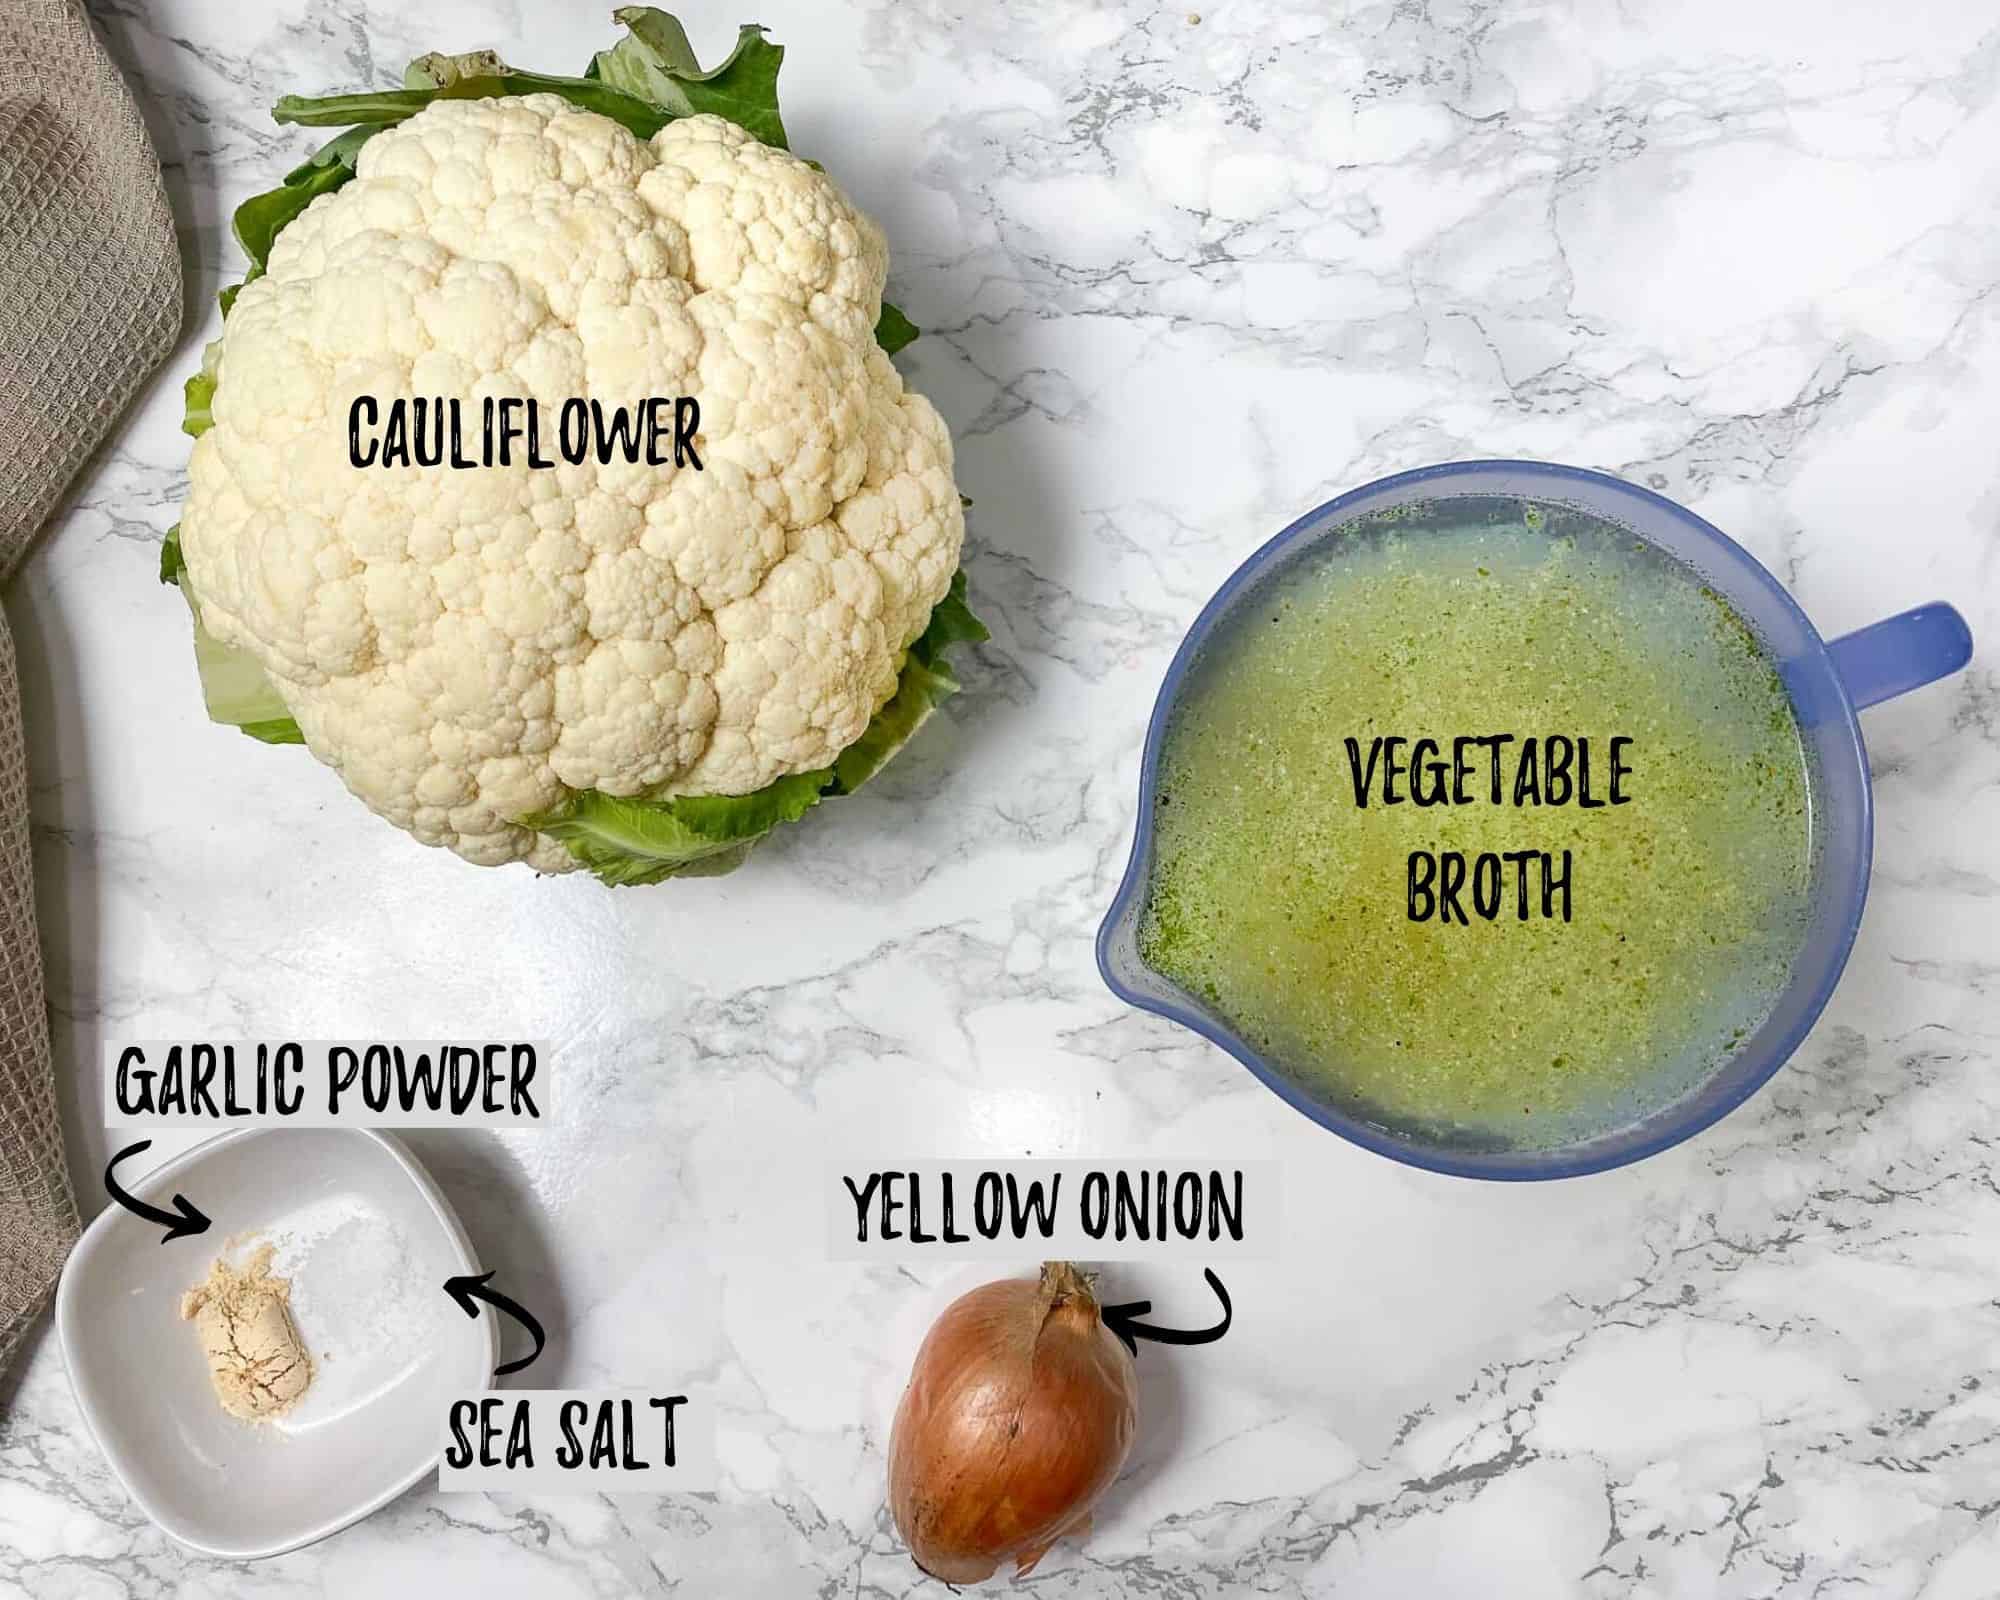 head of cauliflower, yellow onion, bowl of seasoning and measuring cup filled with broth on marble counter